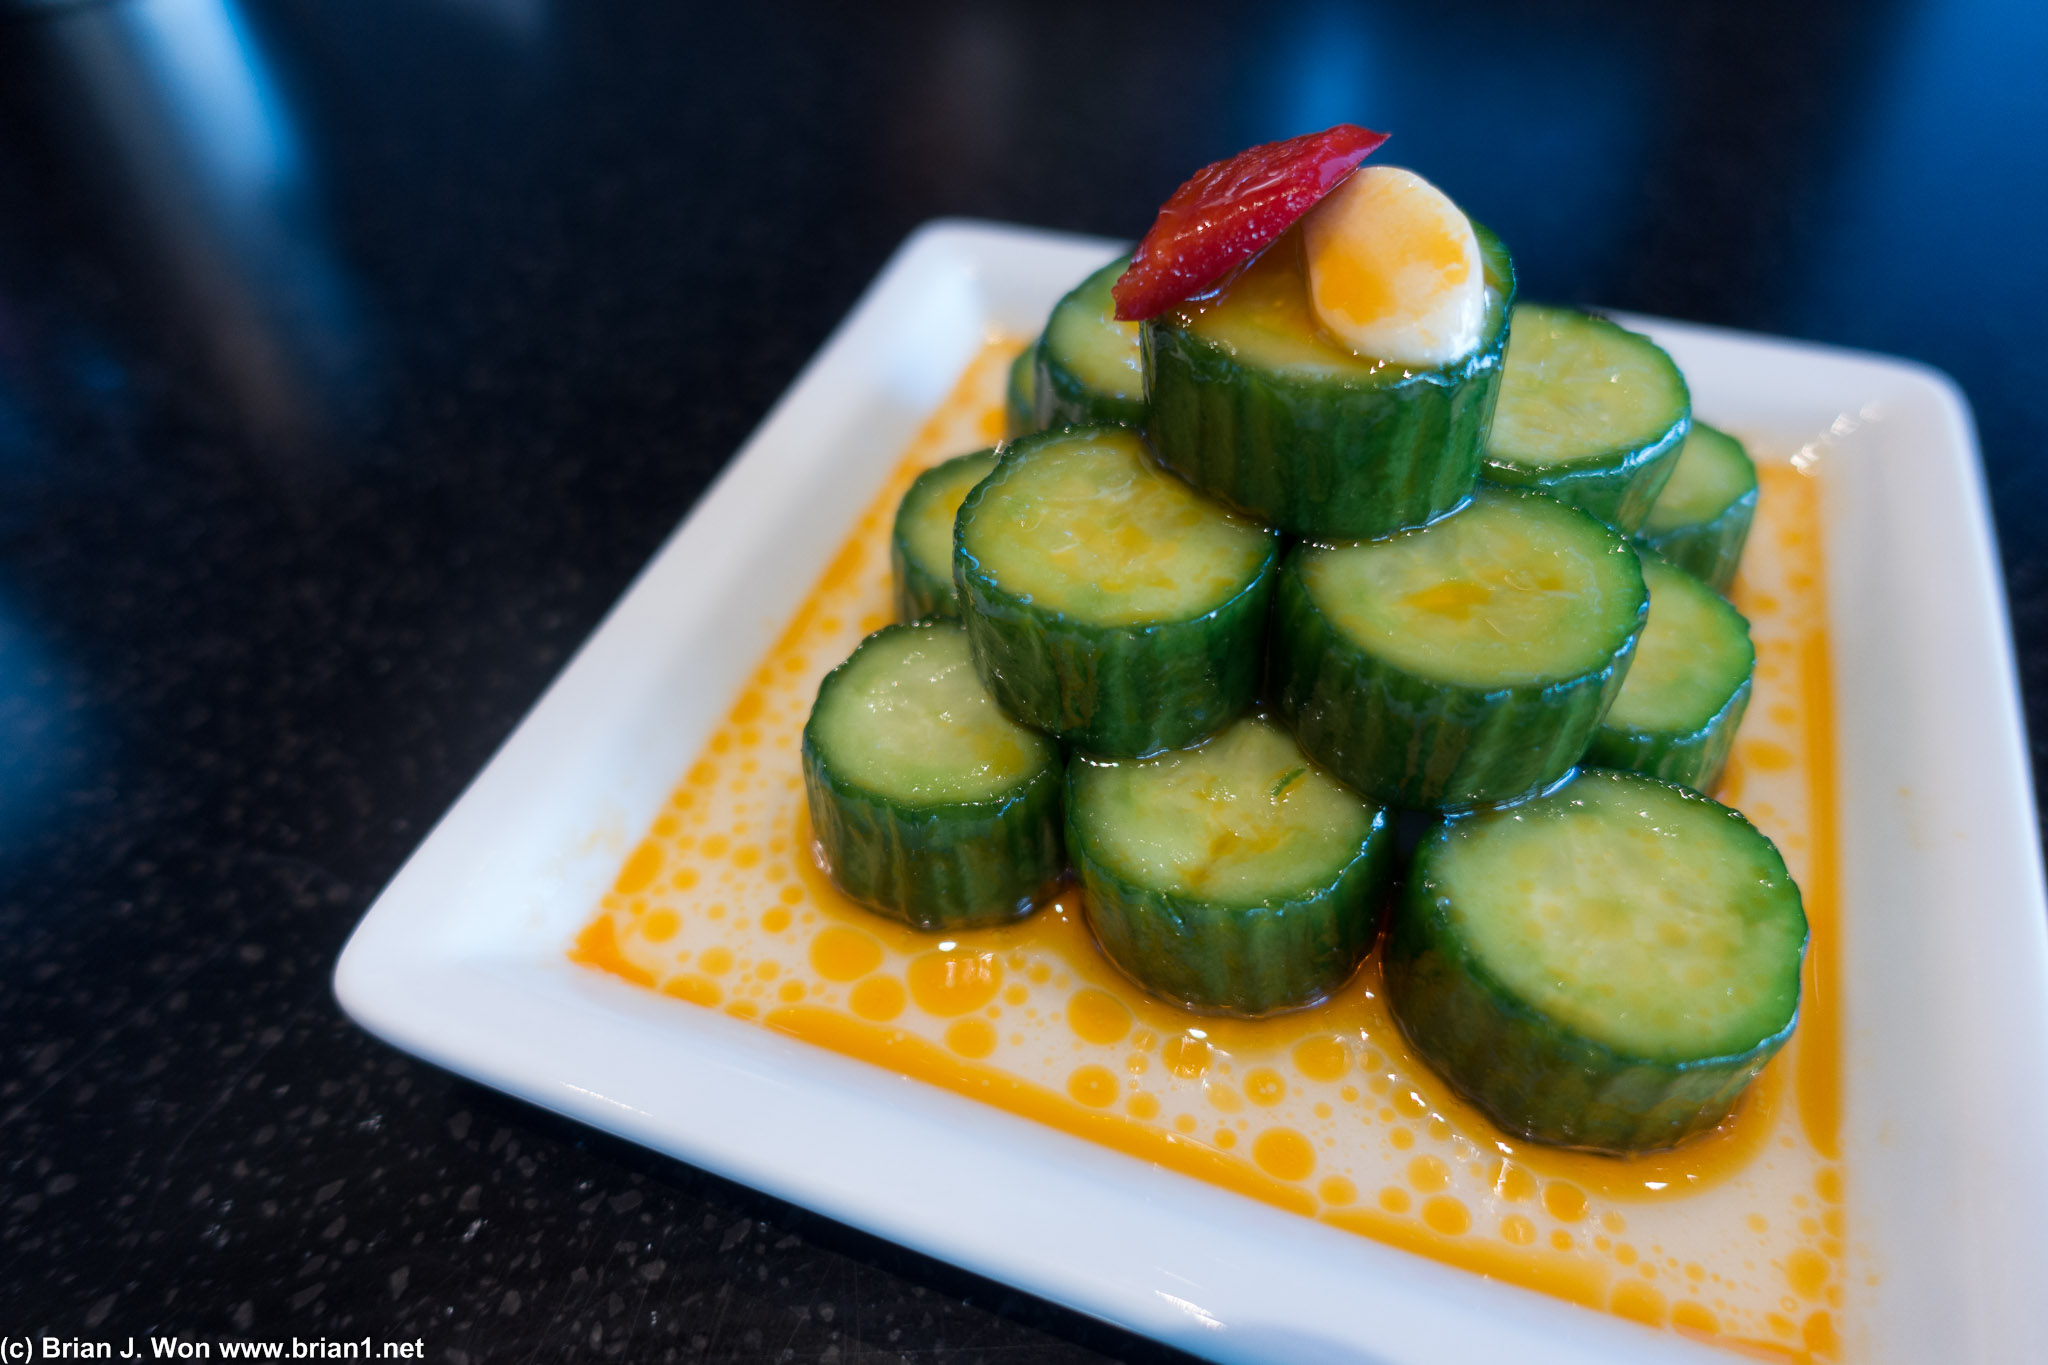 Cold cucumber. So good, so artfully presented.